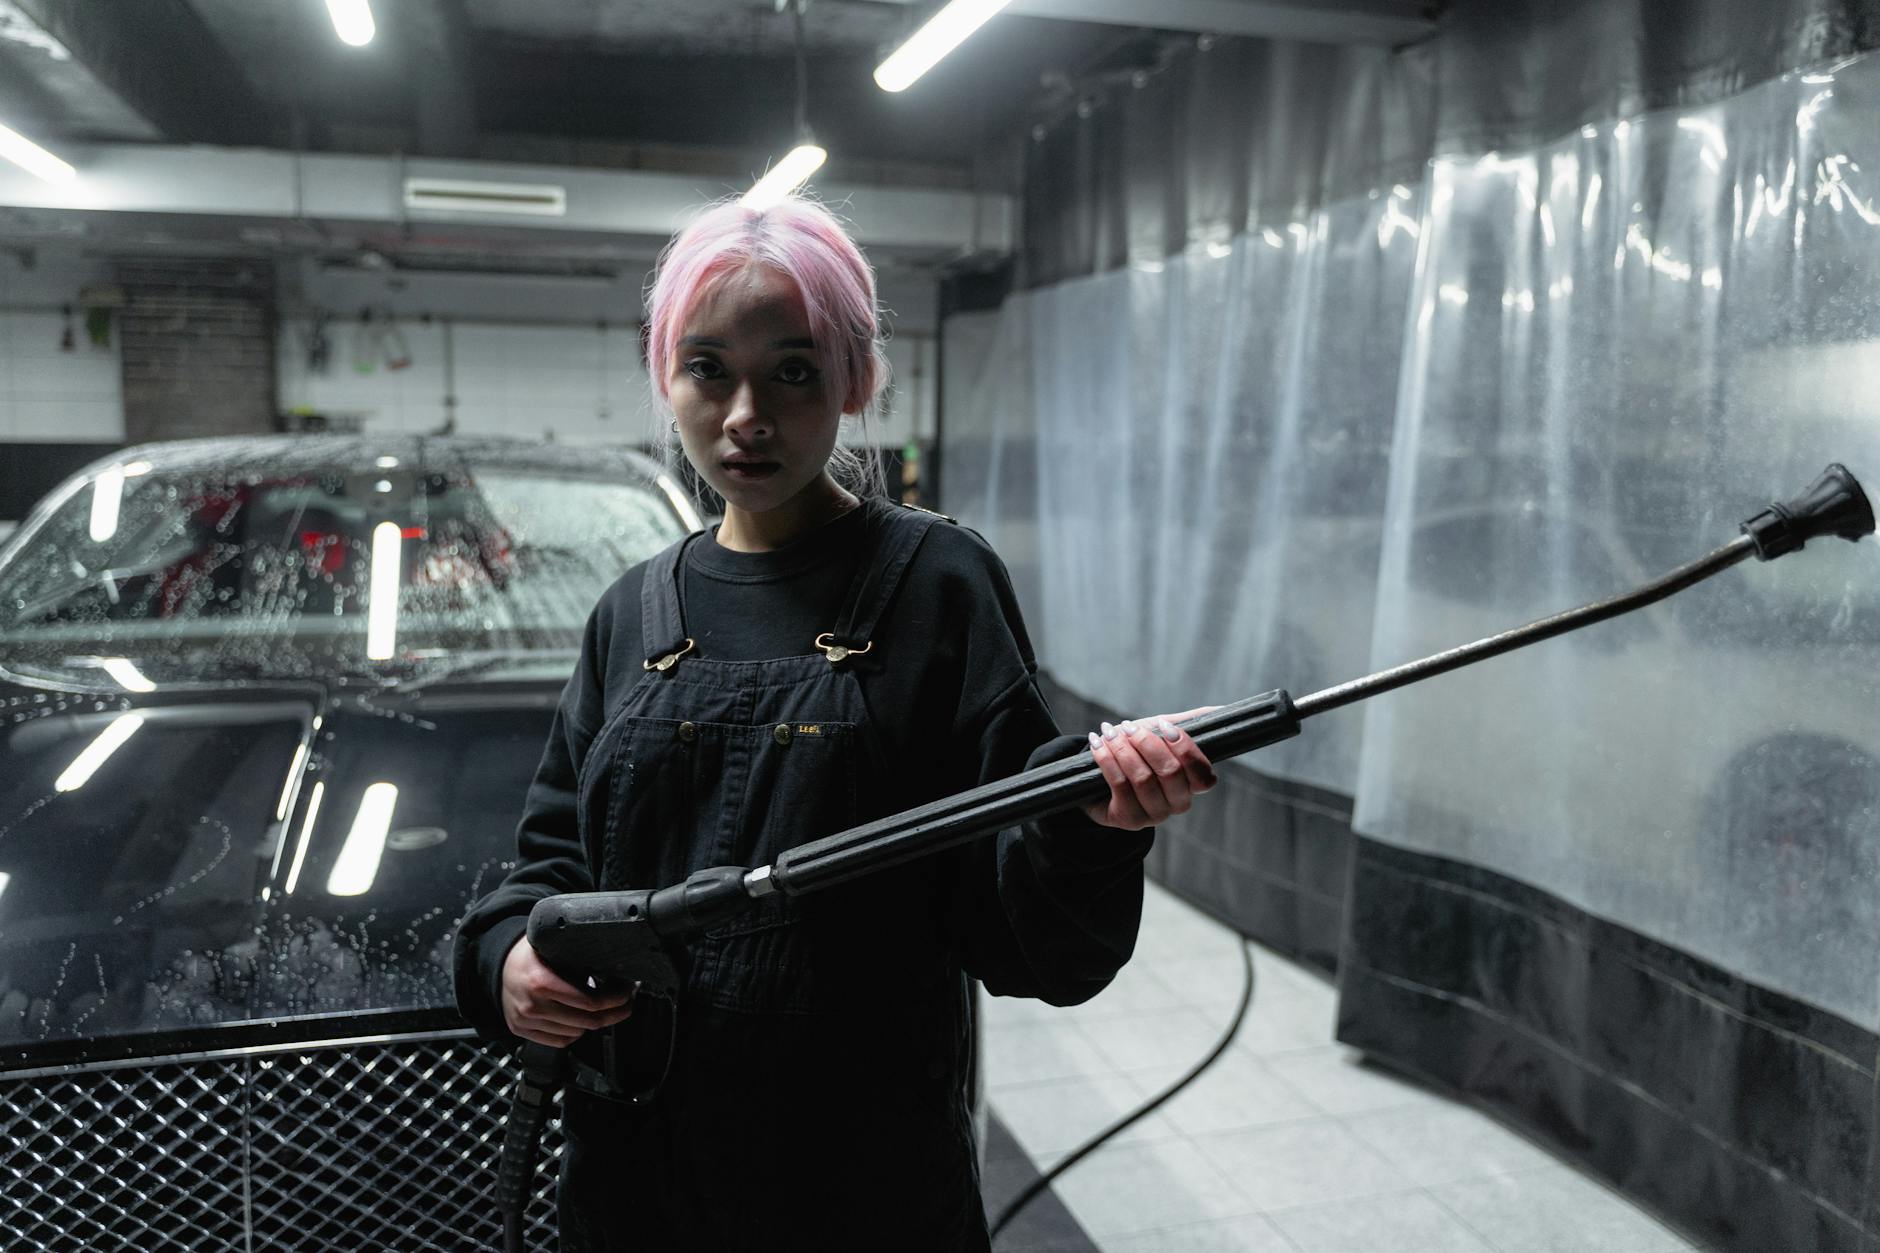 Woman with Pink Hair Holding a Pressure Washer